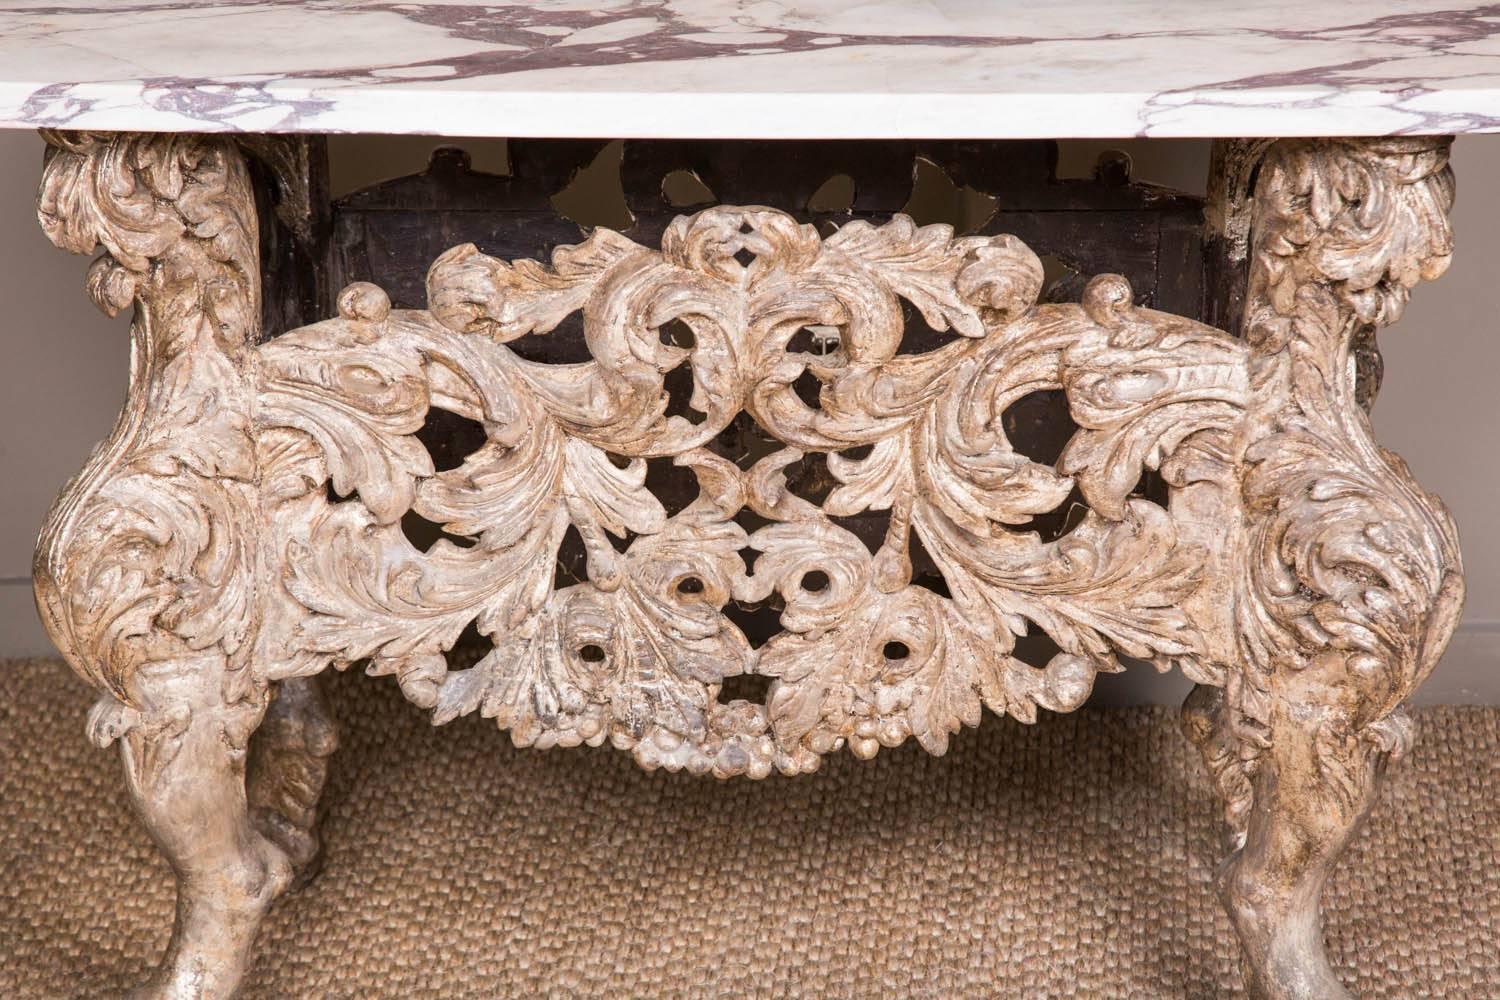 A magnificent Dutch late 17th century silver-gilt console or centre table. On lion paw legs with intricately carved Baroque stretchers panels. The silver gilding beautifully aged and muted. The Brocatello top thickly hewn from a solid and